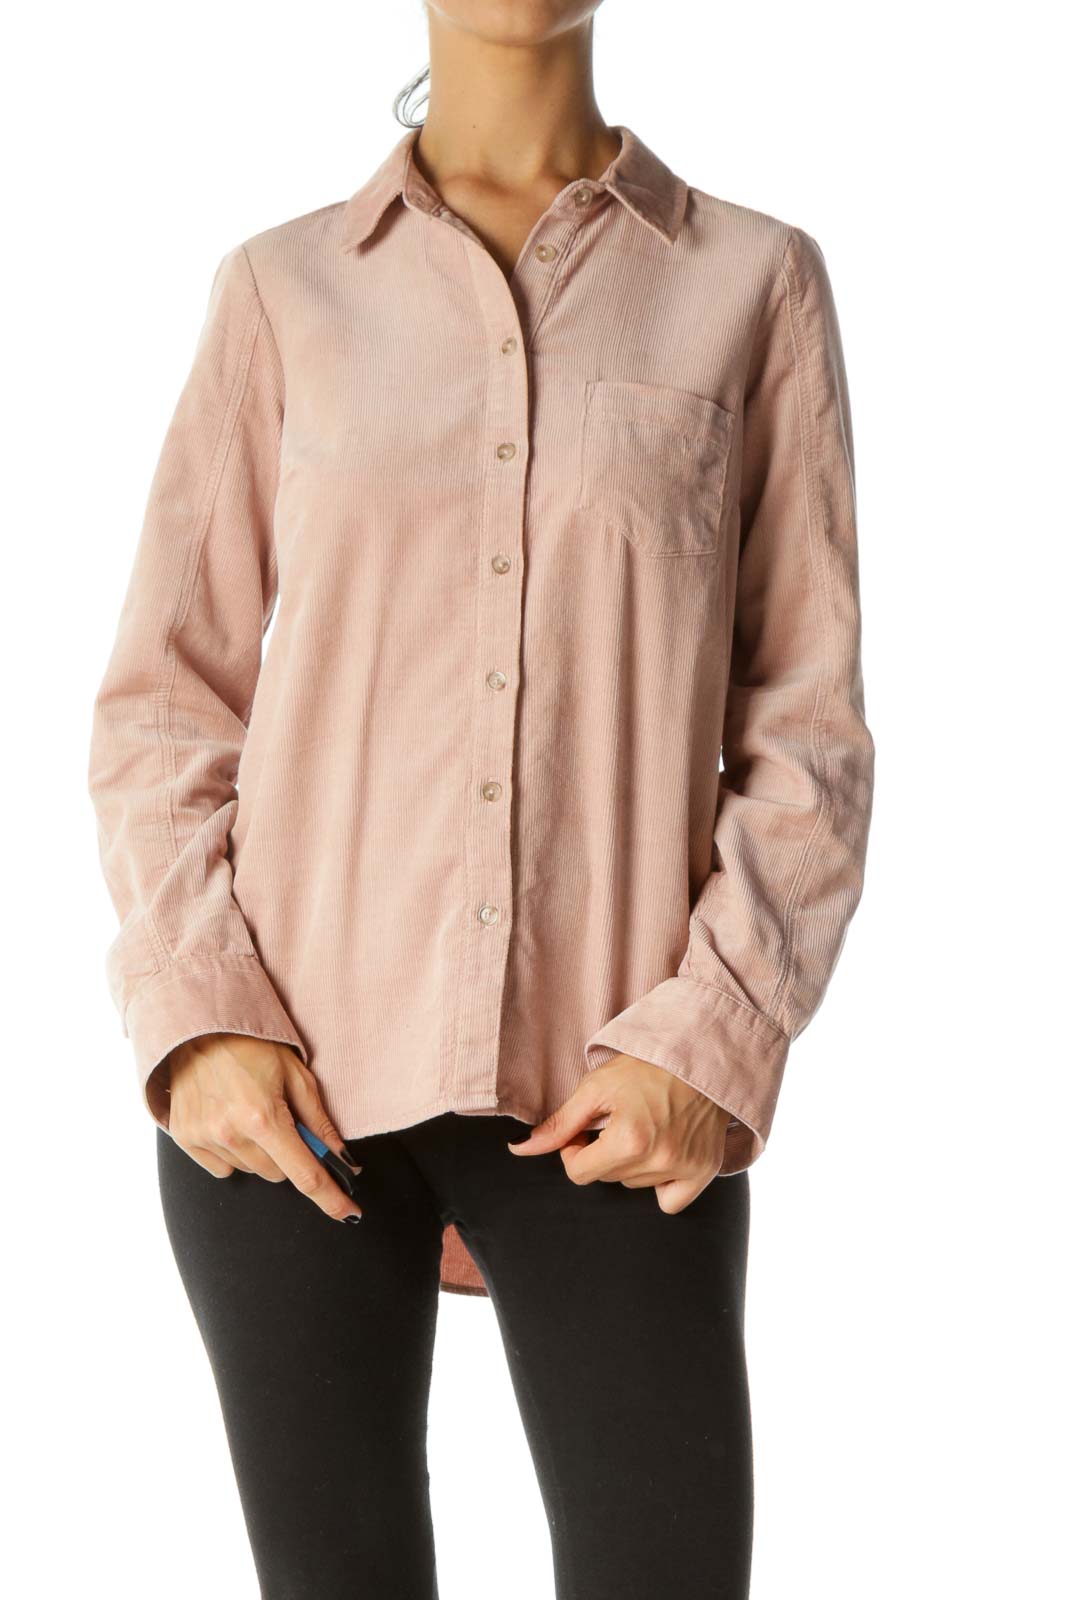 Light Pink Corduroy Buttoned Collared Long Sleeve Shirt Front